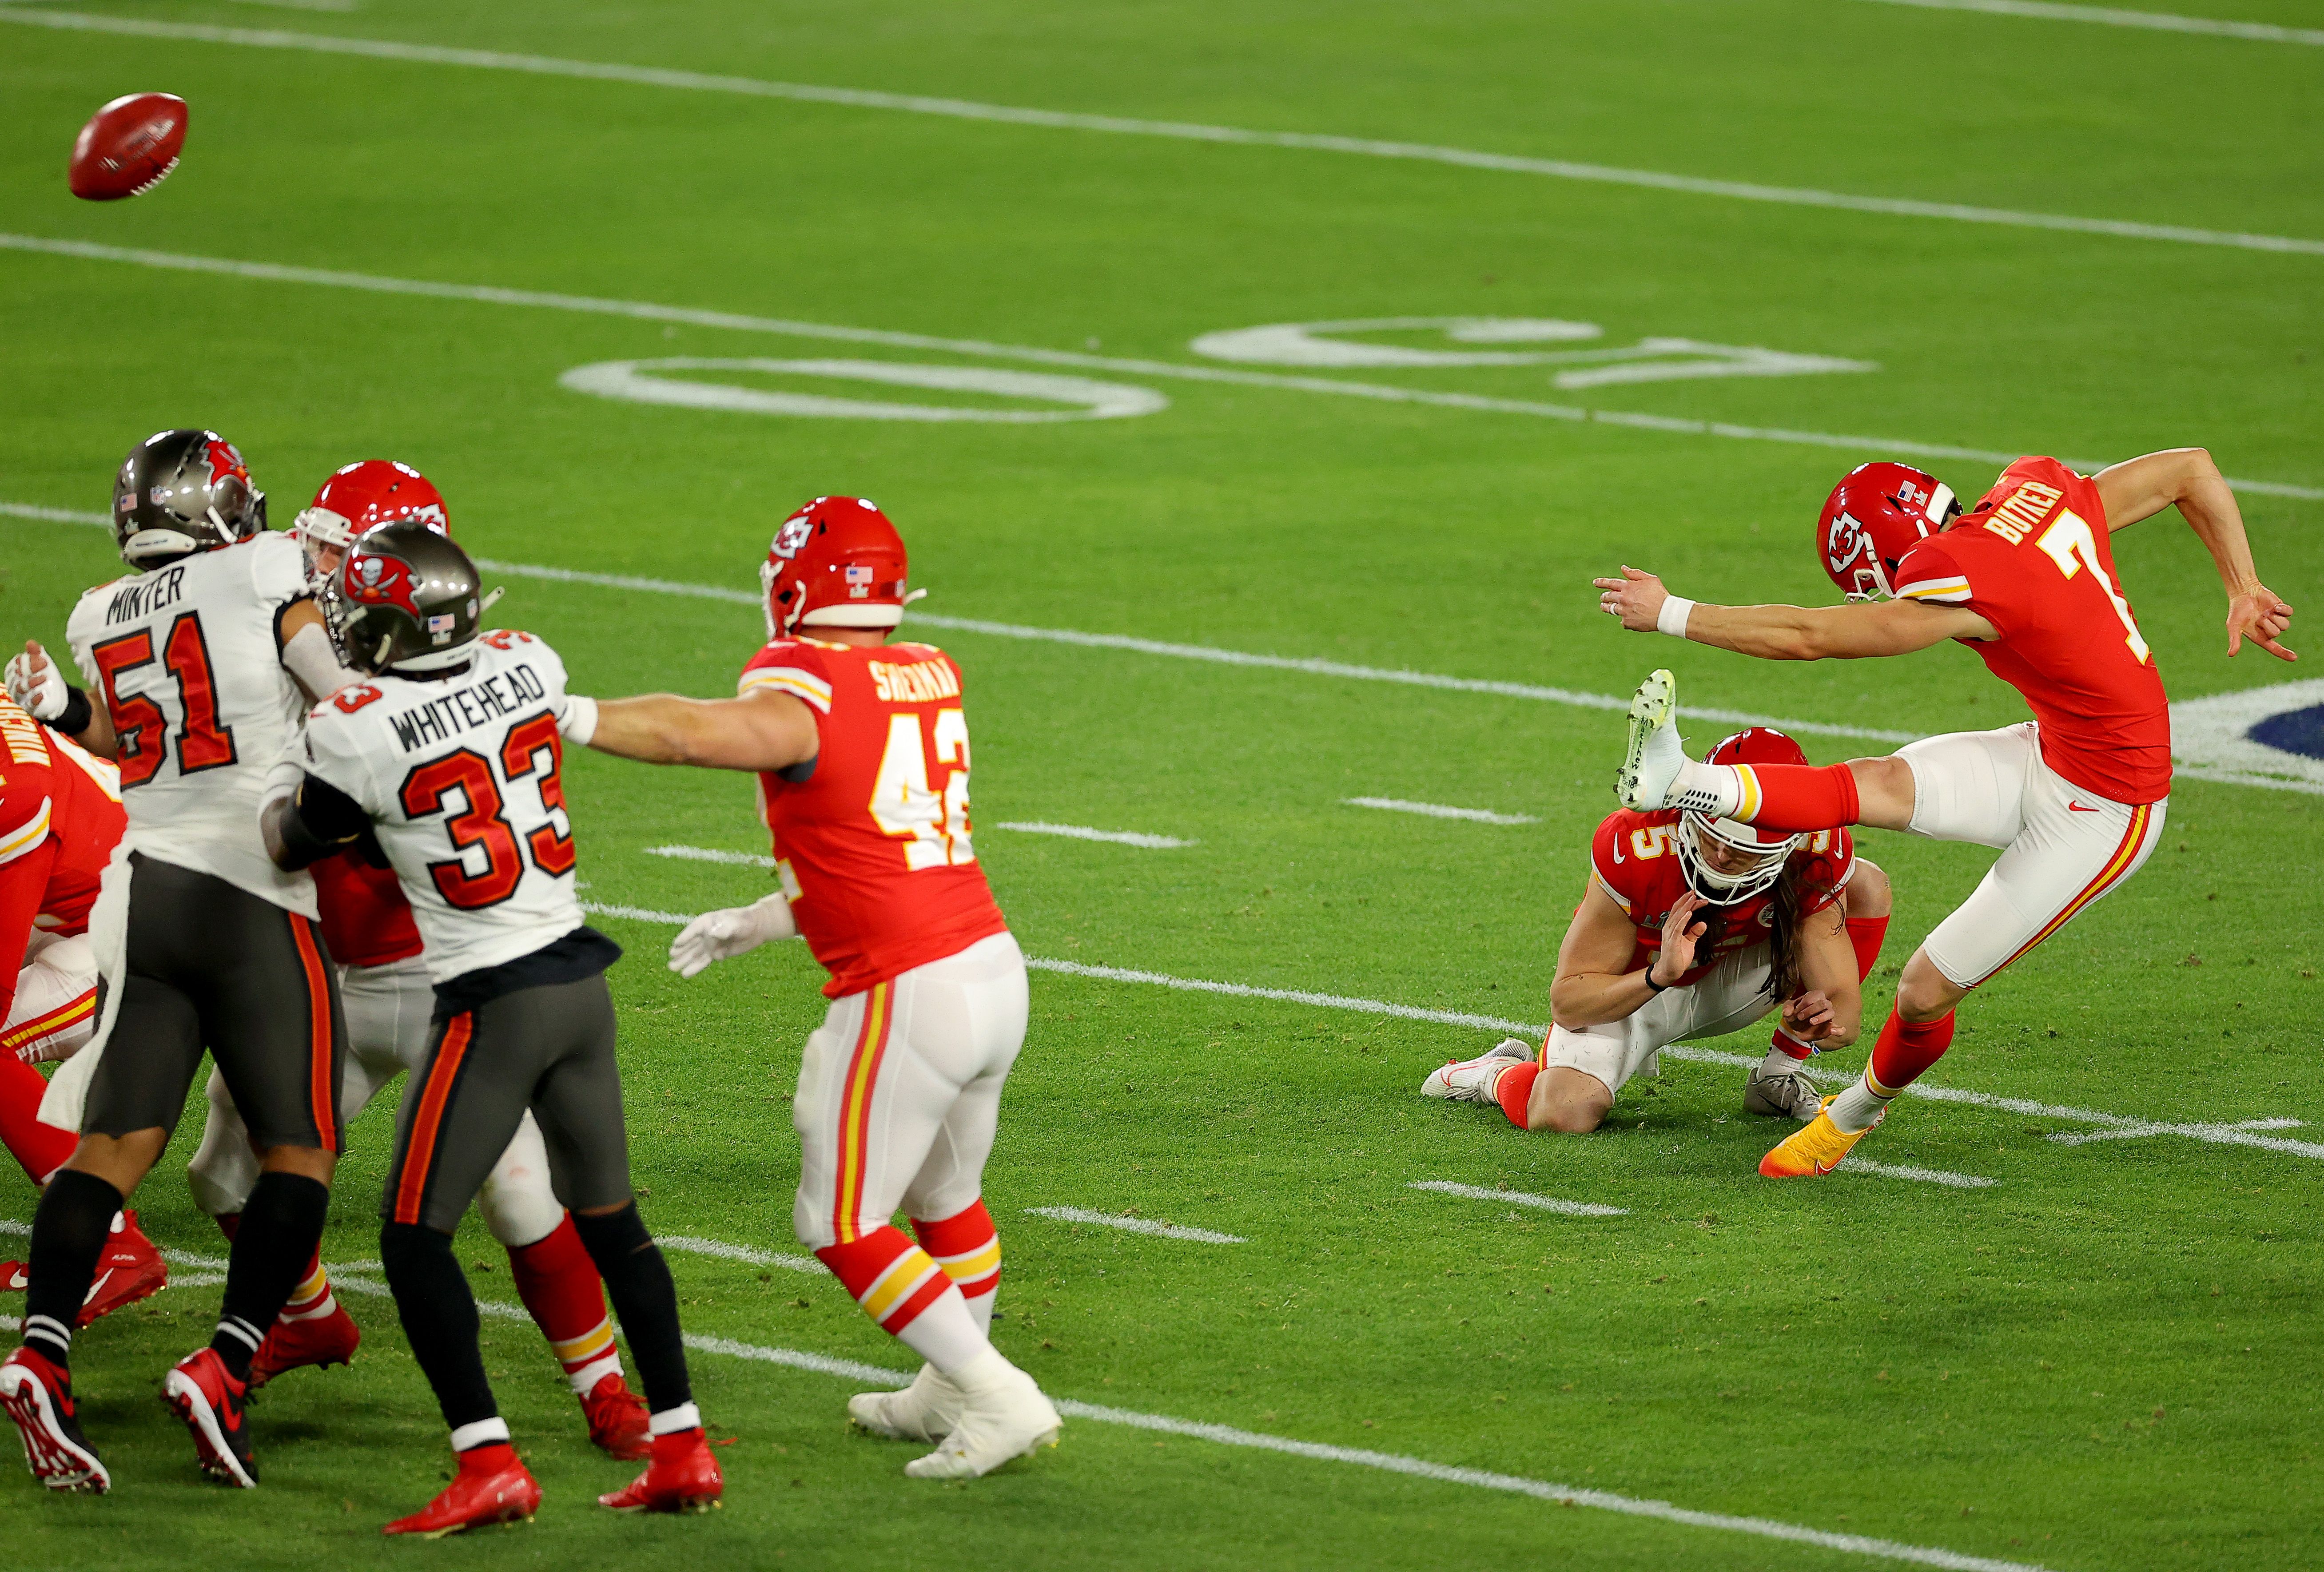 Harrison Butker #7 of the Kansas City Chiefs kicks a 49 yard field goal in the first quarter against the Tampa Bay Buccaneers 